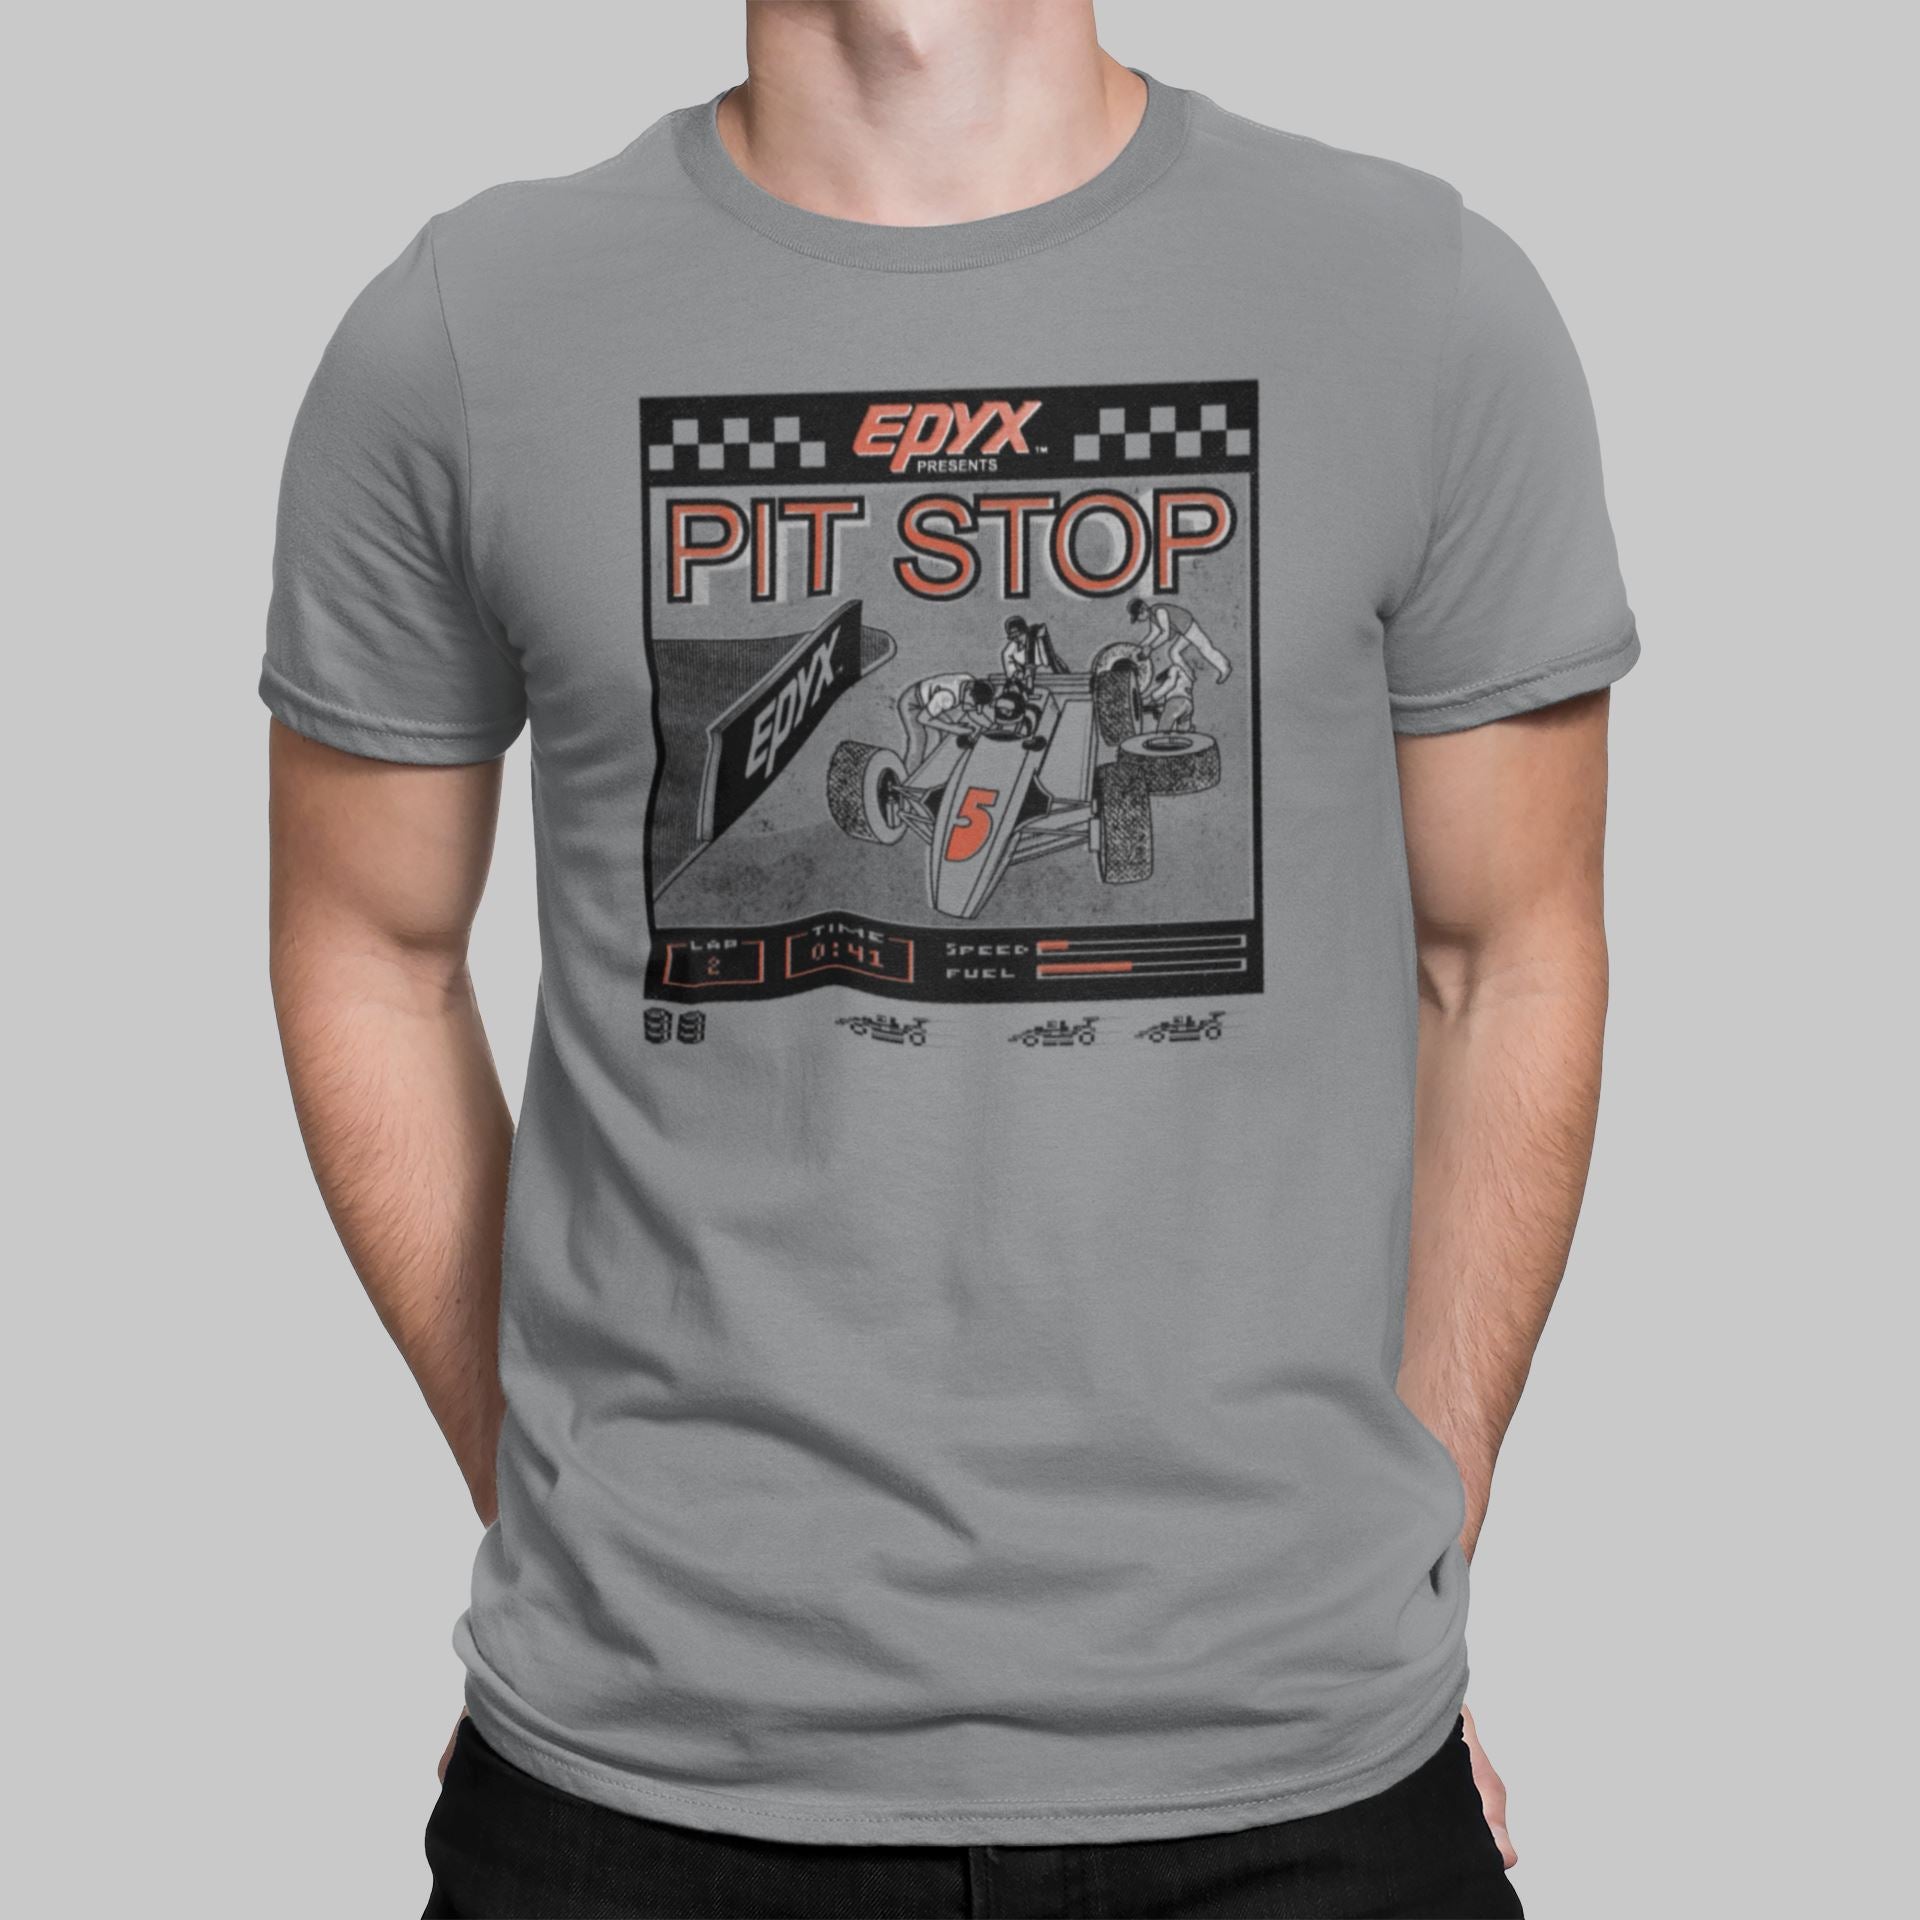 Pit Stop Retro Gaming T-Shirt T-Shirt Seven Squared Small 34-36" Sport Grey 